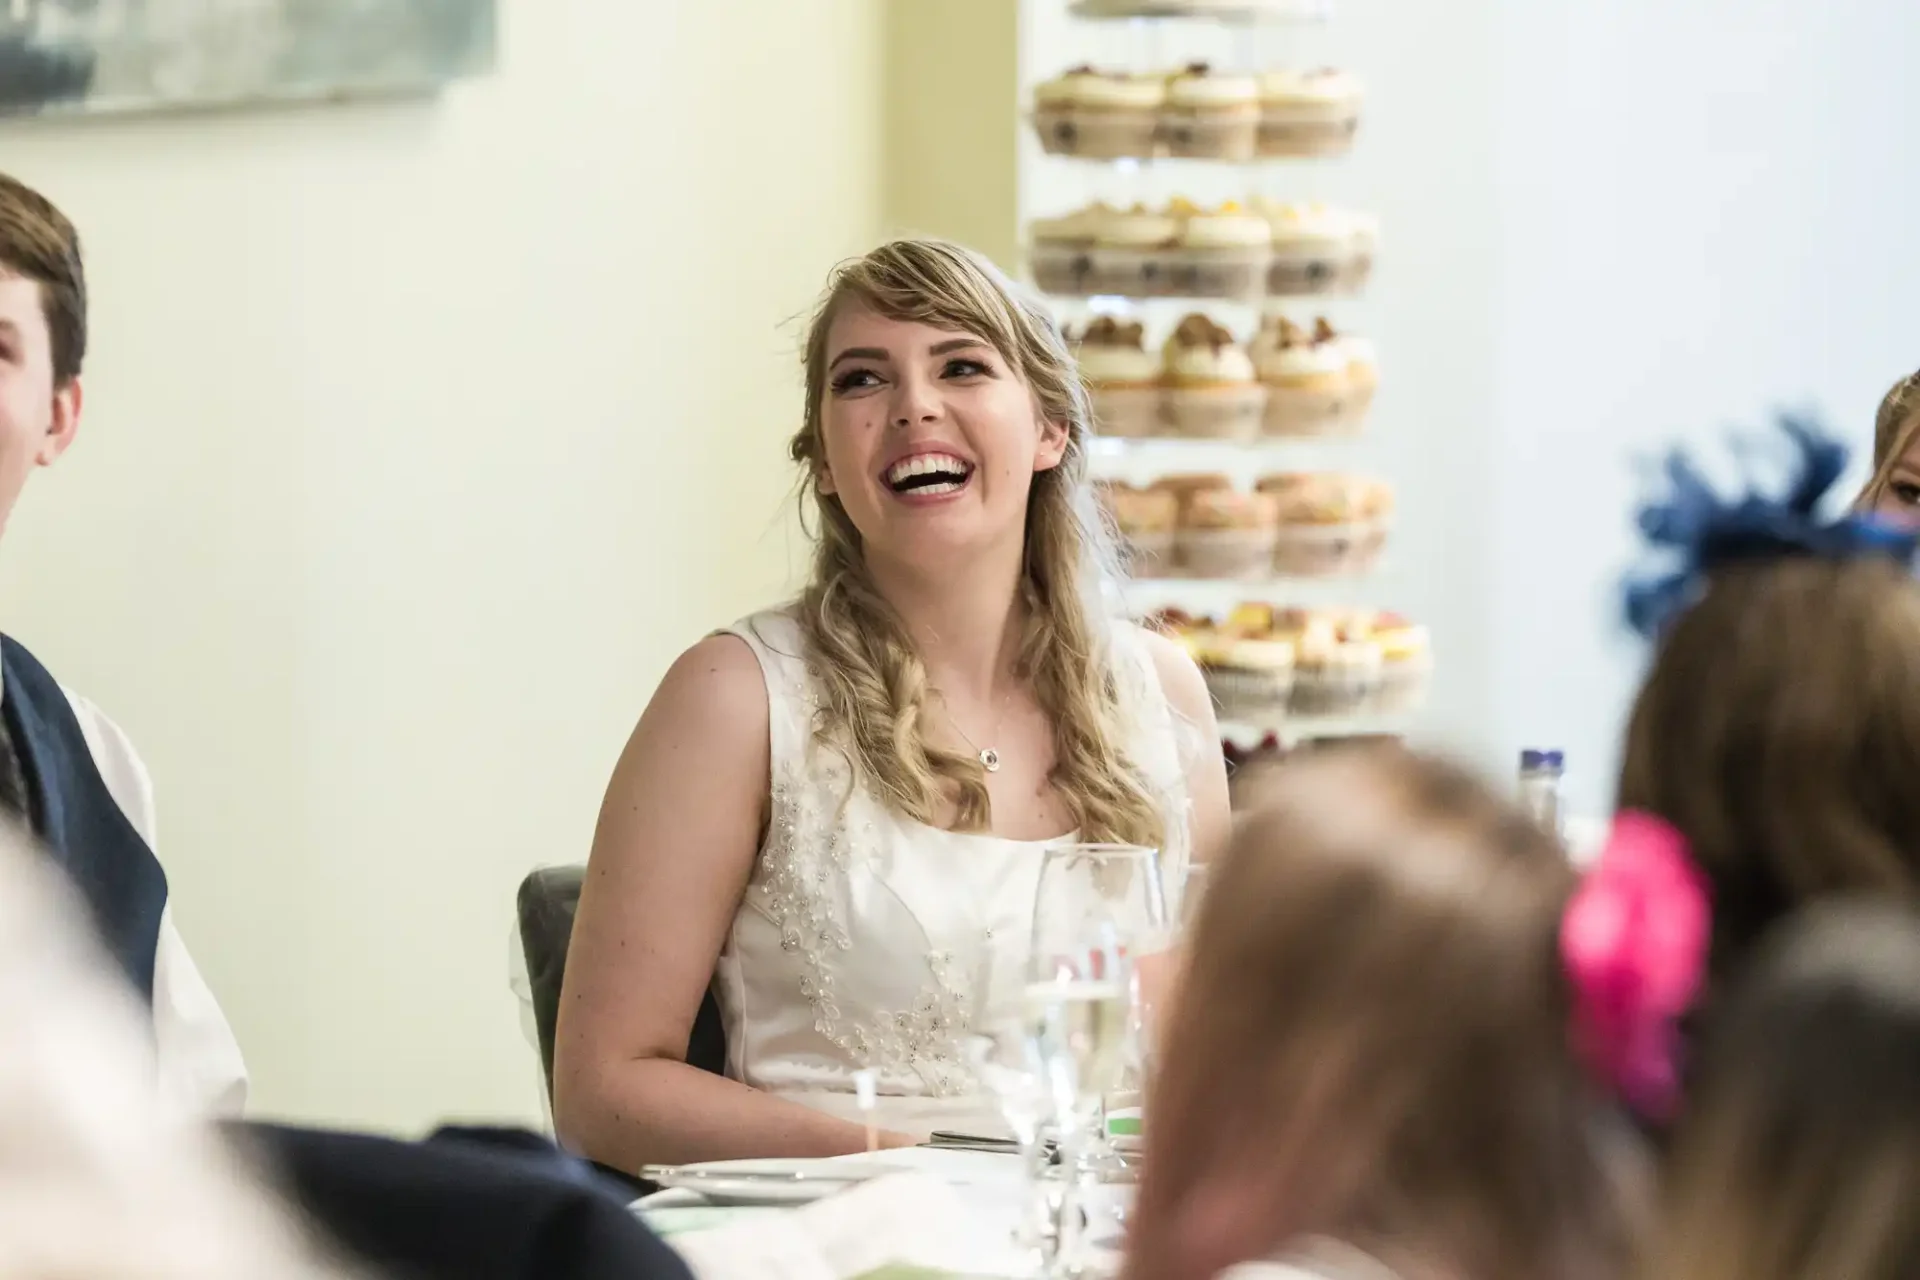 A bride smiling at a wedding reception table, with guests and a stack of desserts blurred in the background.